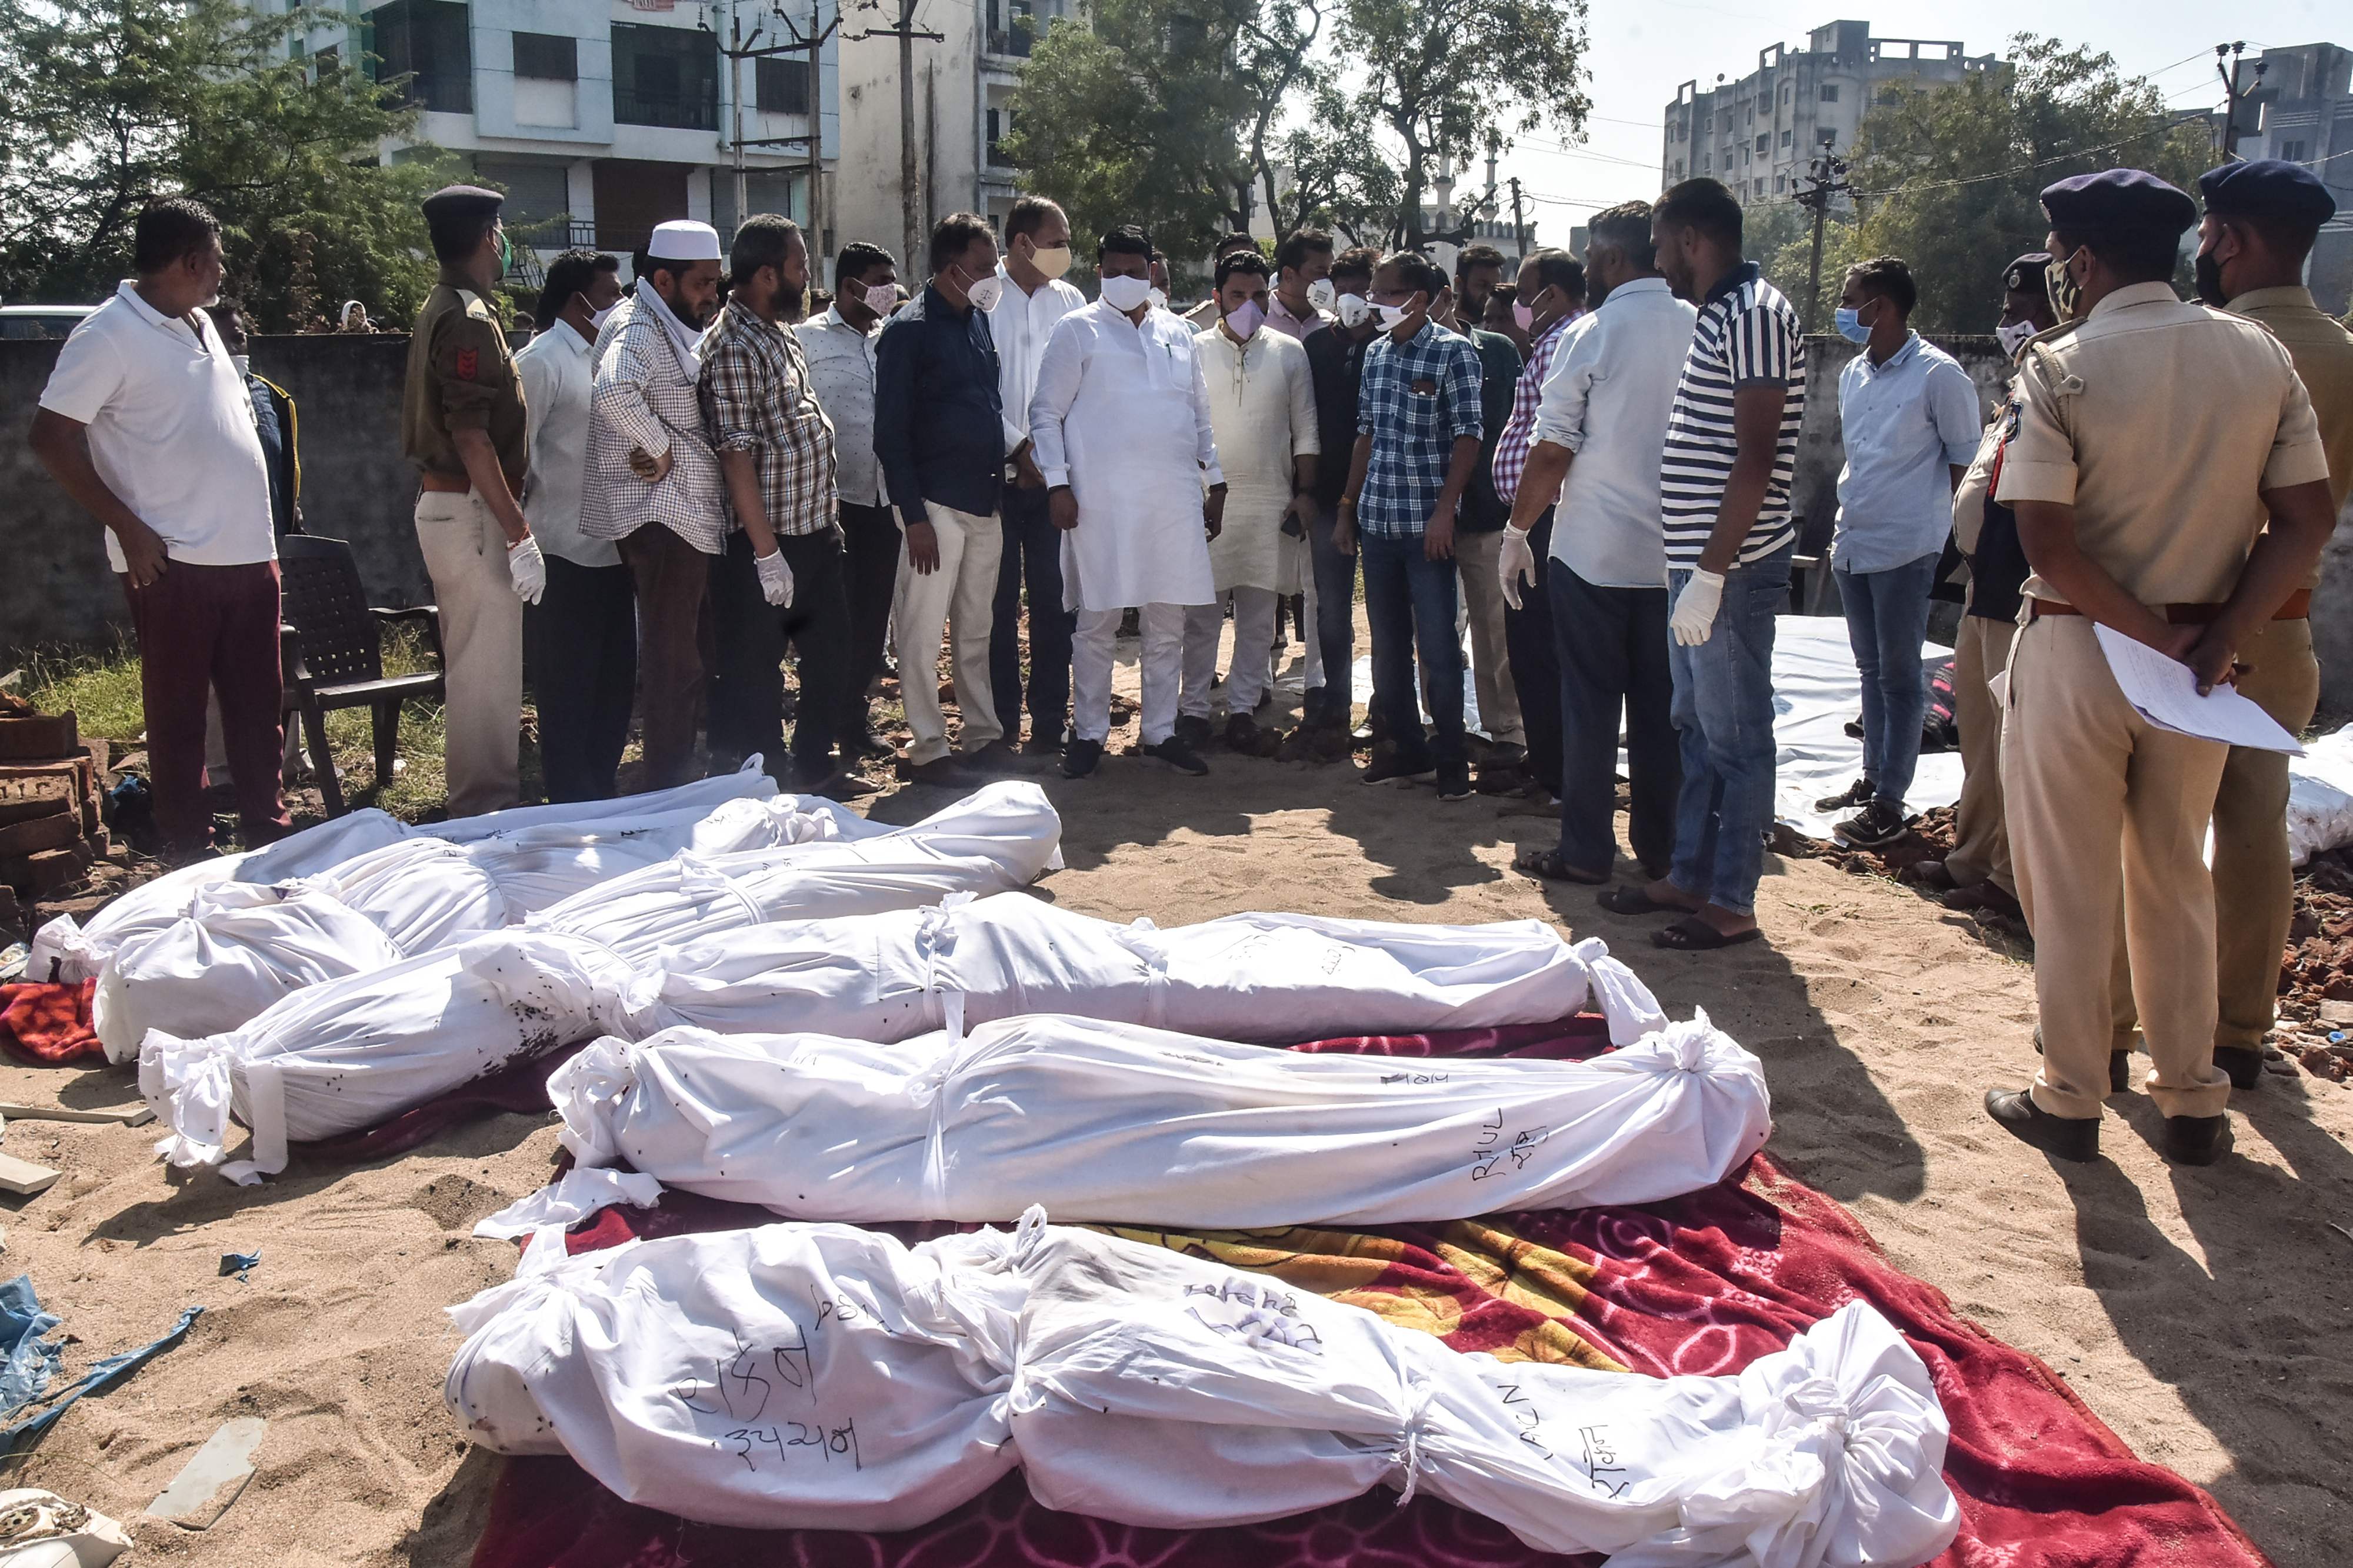 Police personnel and residents gather around the bodies of victims after a truck lost control and ran over them while sleeping in Surat district.